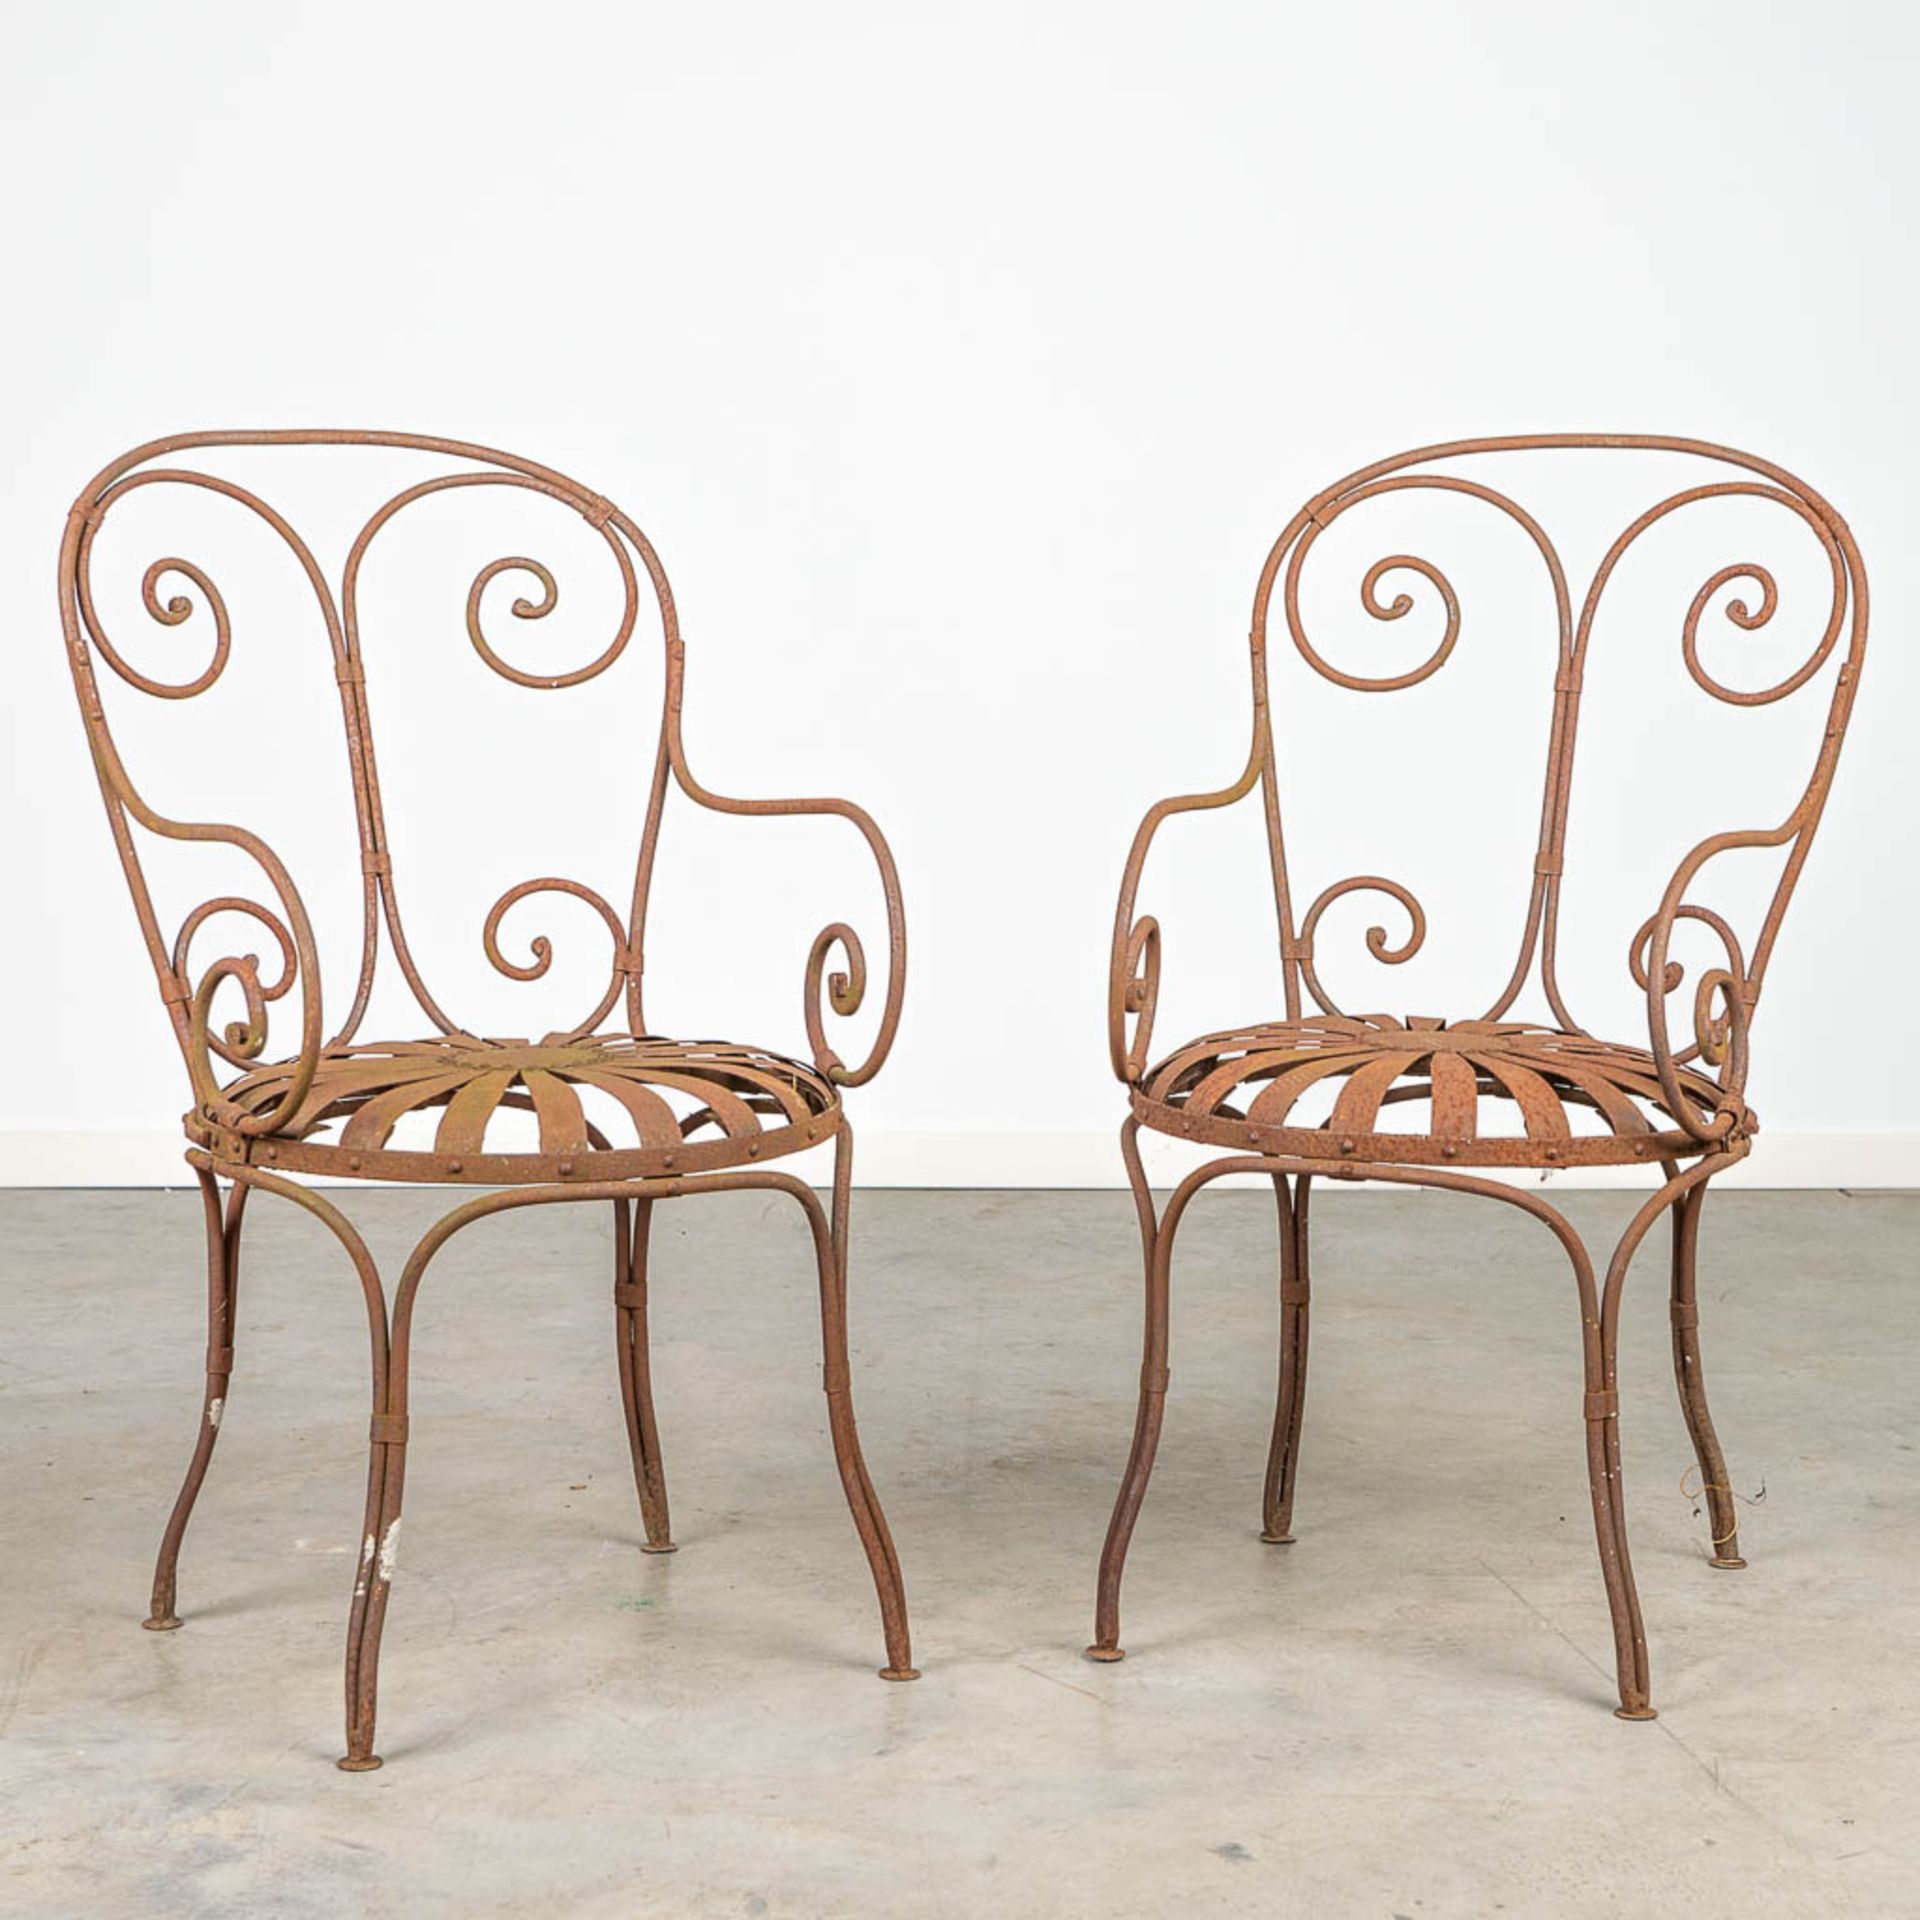 A pair of garden chairs made of wrought iron. - Image 2 of 6